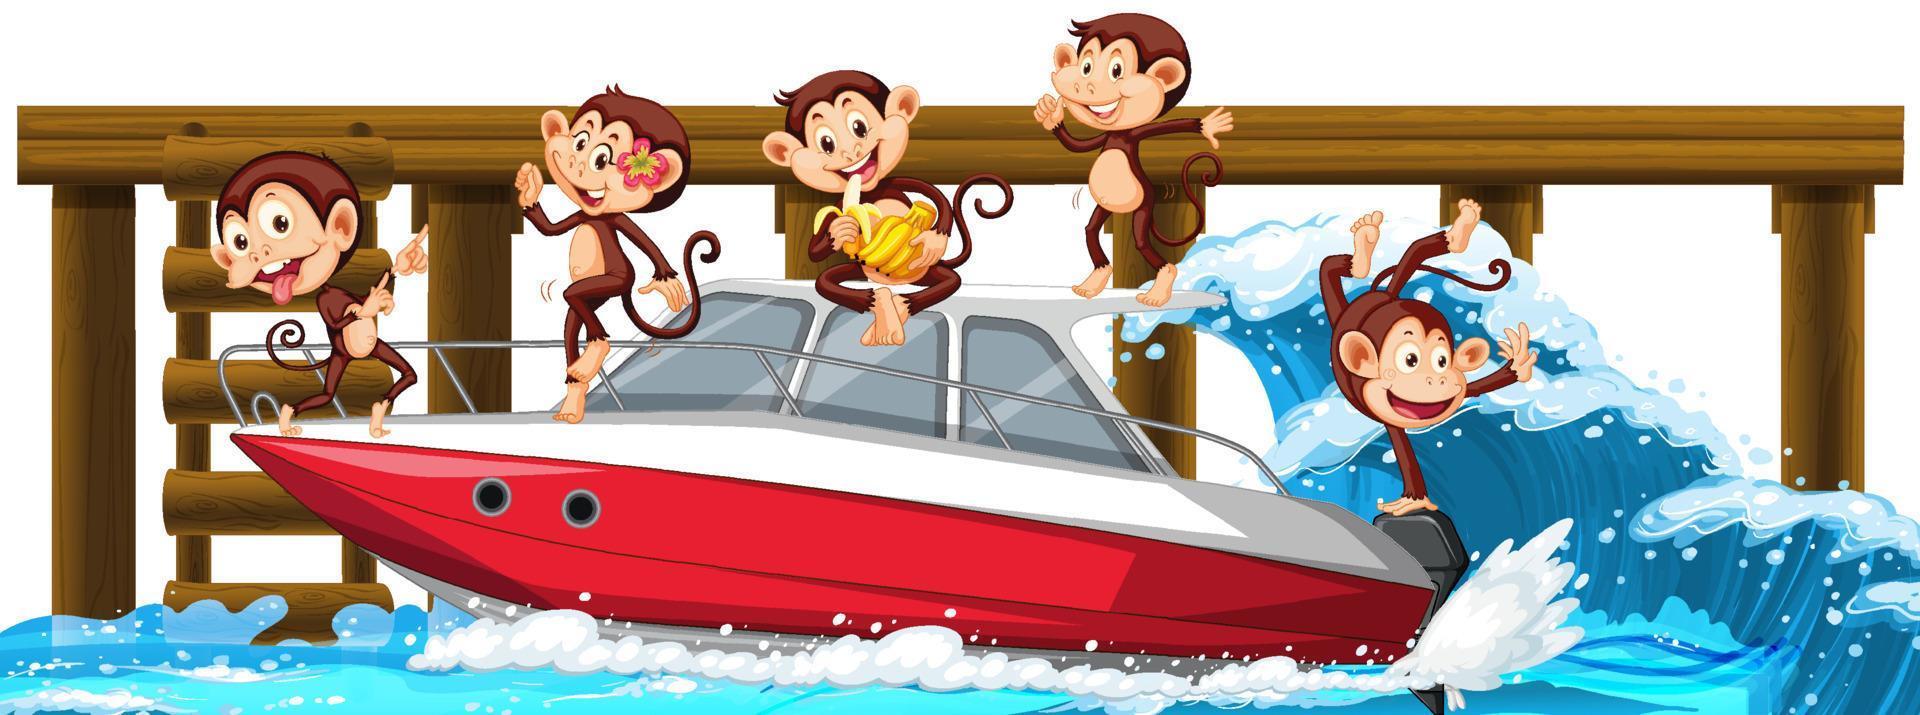 Wooden pier with many monkeys on speedboats vector